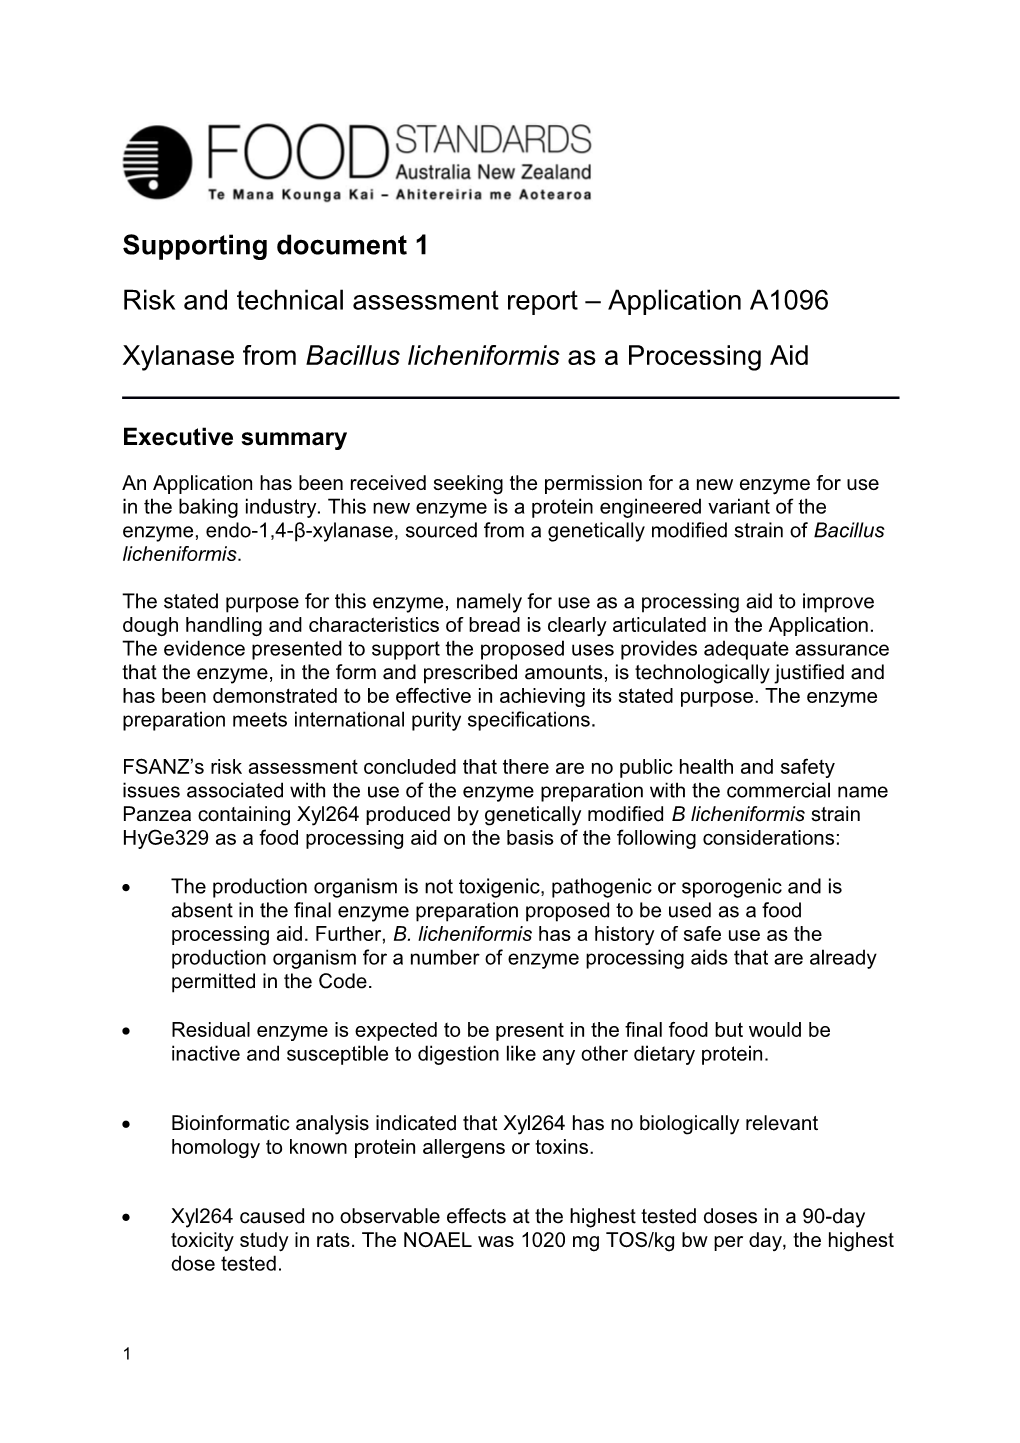 Risk and Technical Assessment Report Application A1096